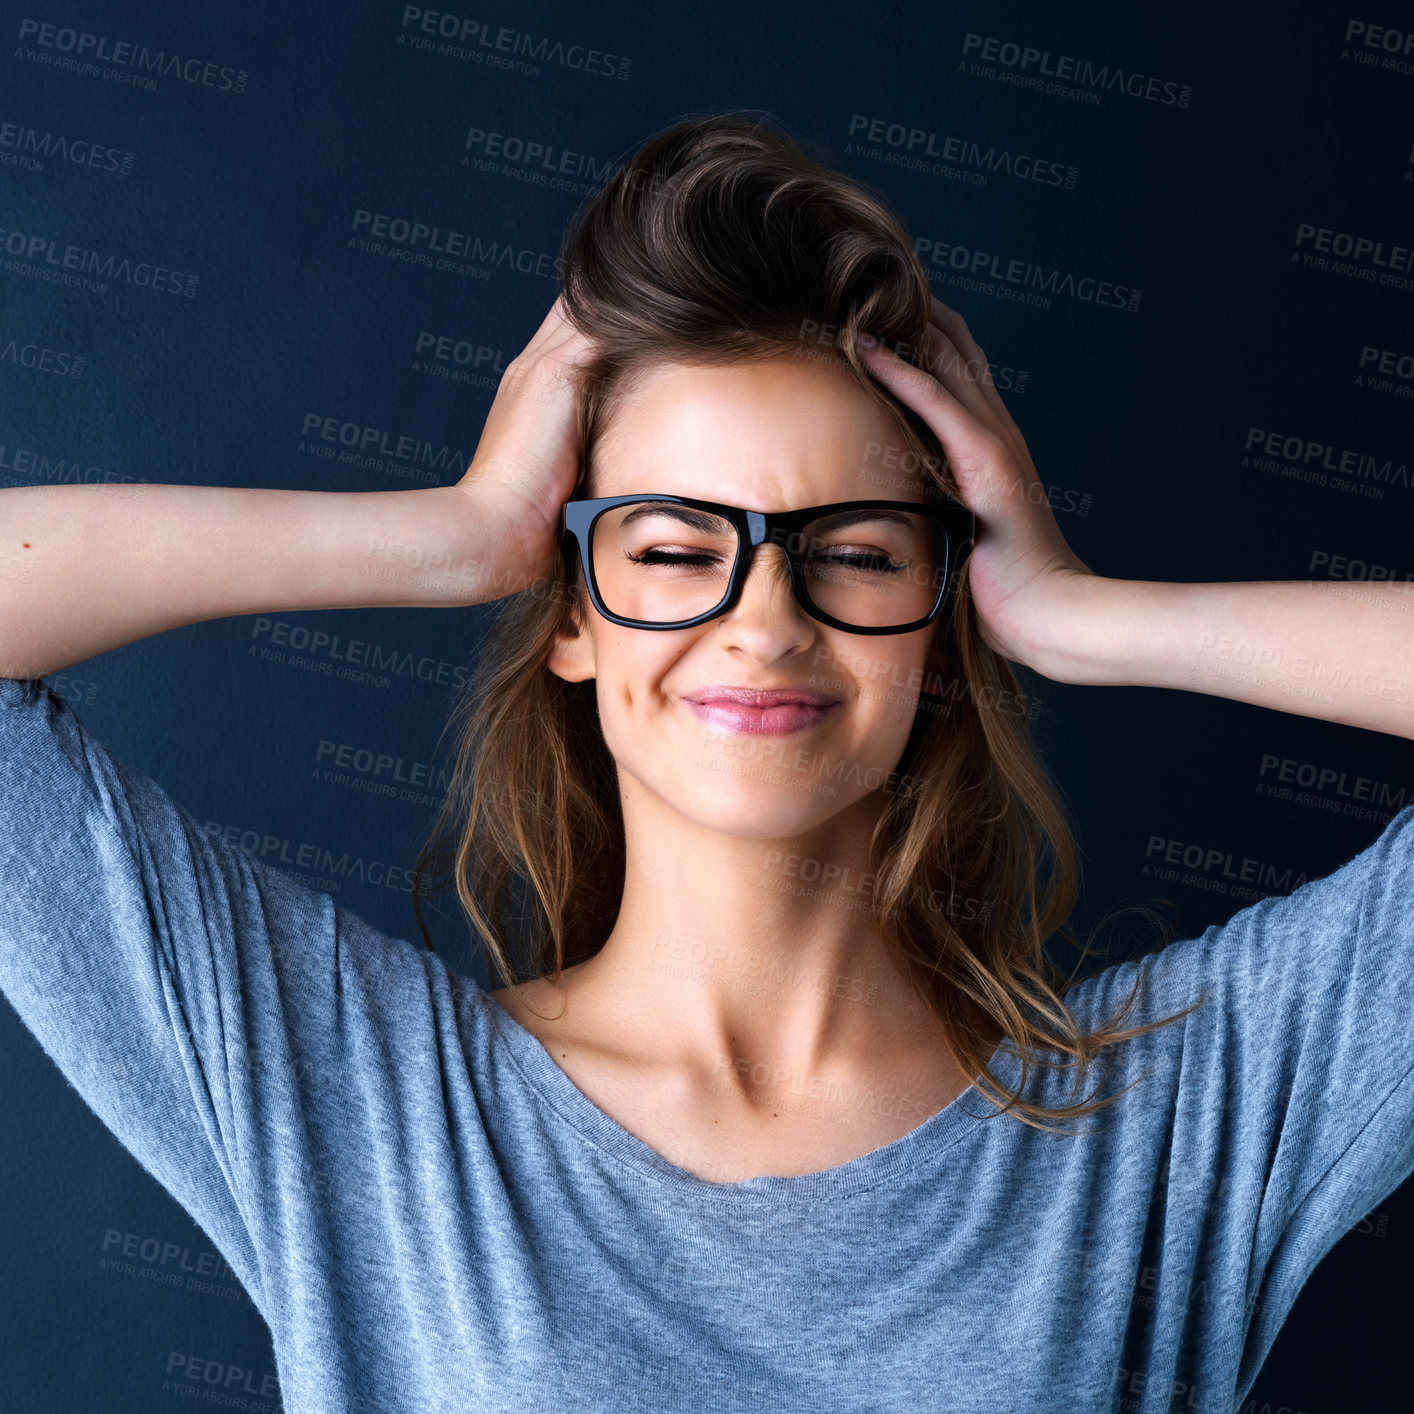 Buy stock photo Studio shot of a cute teenage girl in glasses with her hands in her hair posing against a dark background